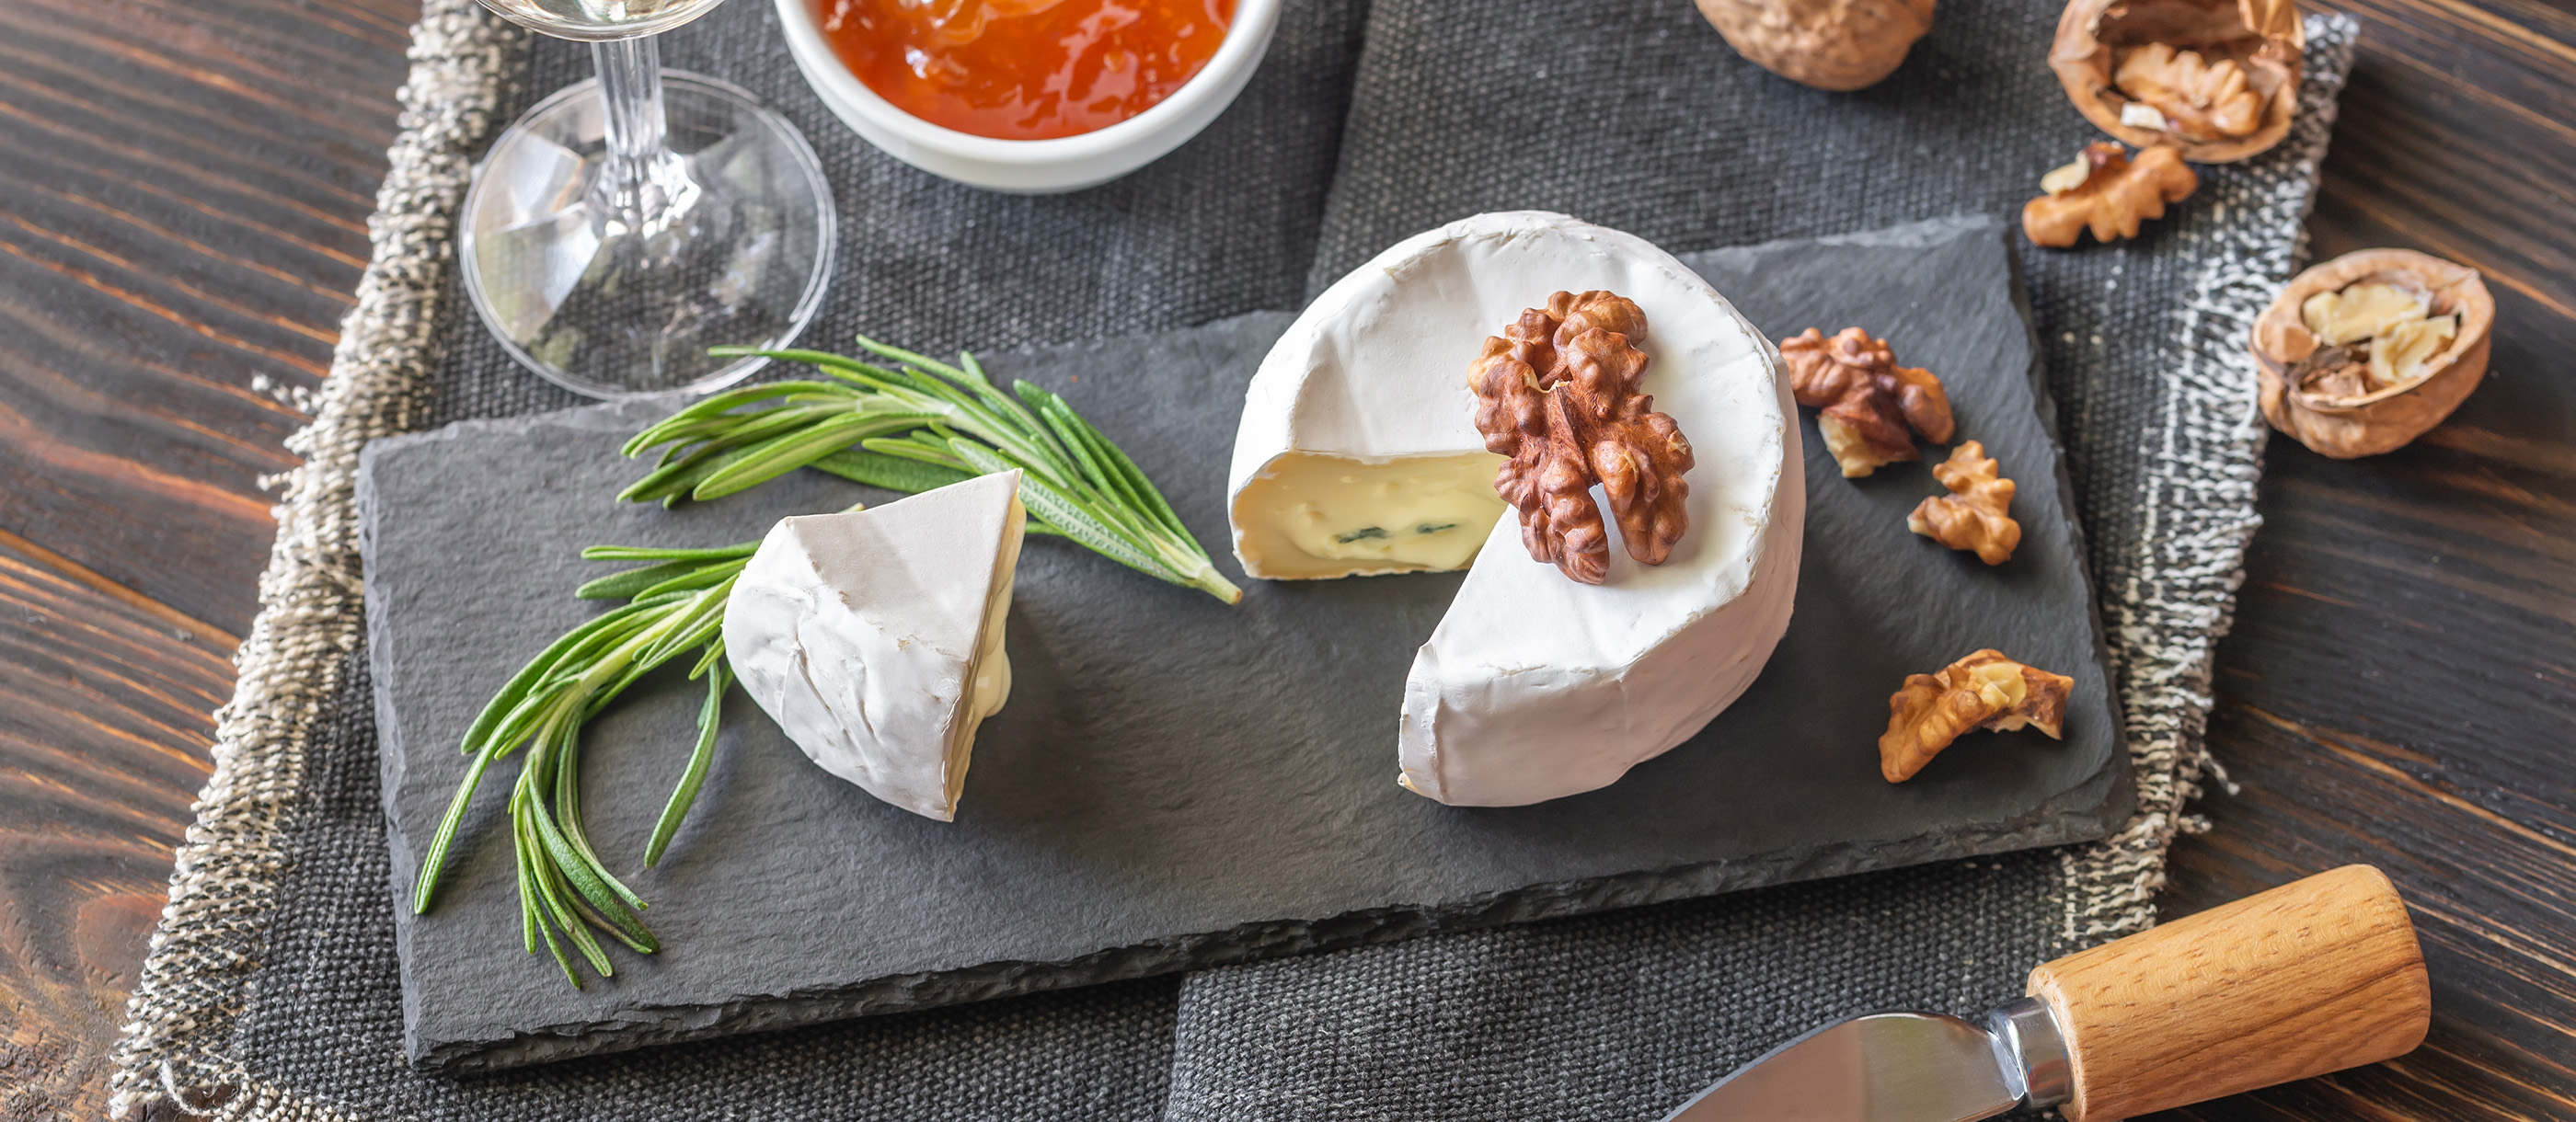 100 Most Popular Cheeses in the World TasteAtlas